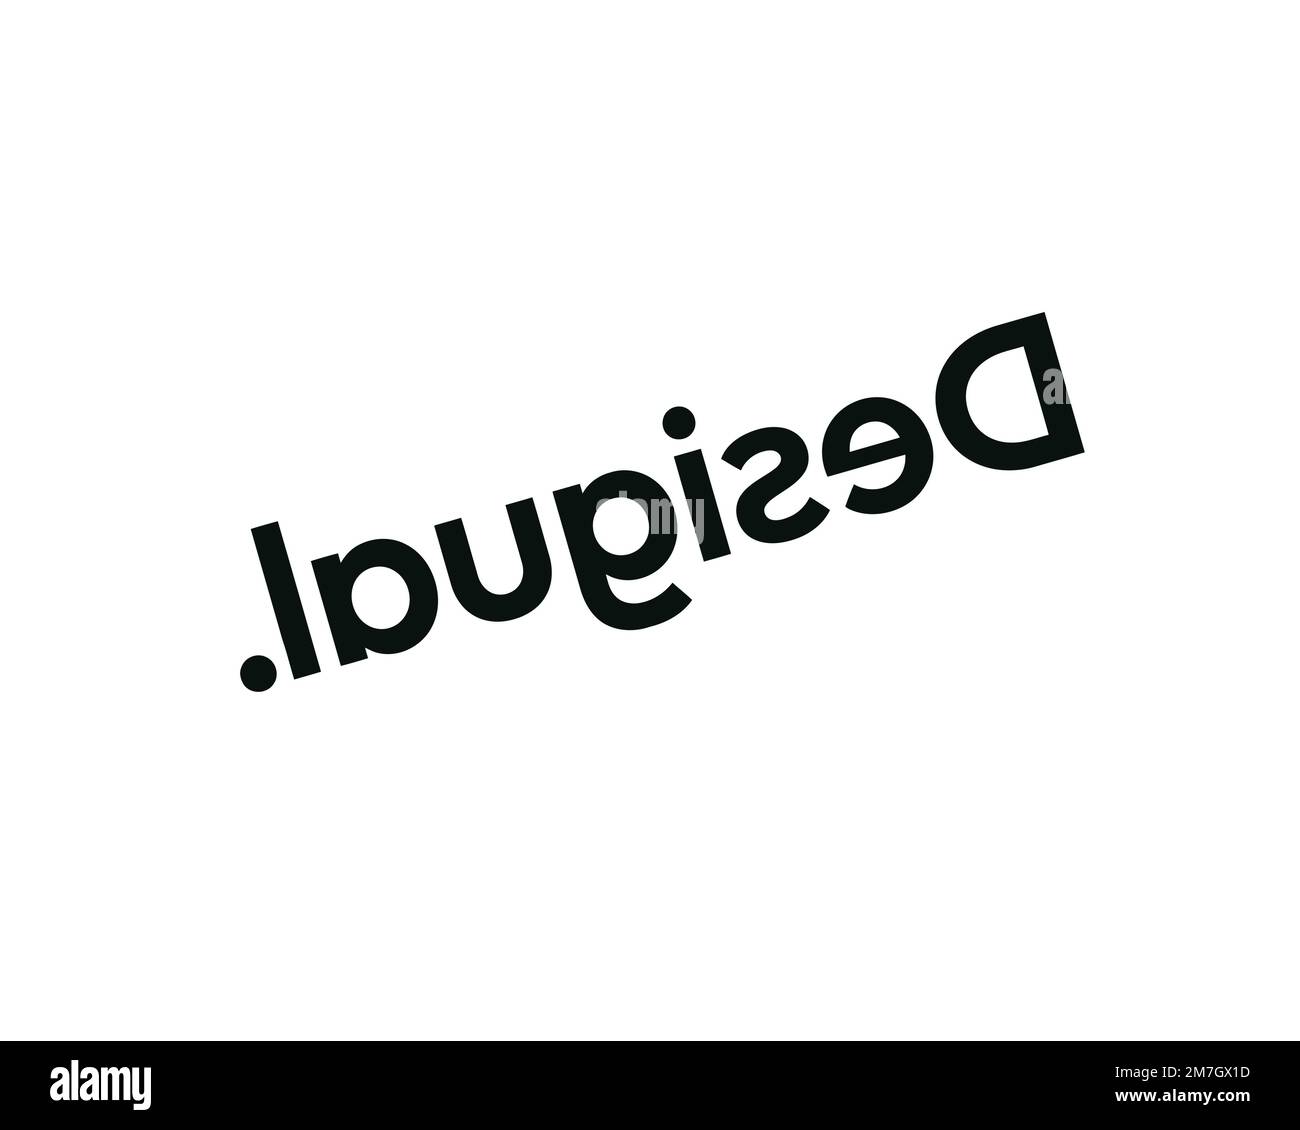 Desigual logo brand trademark Cut Out Stock Images & Pictures - Alamy